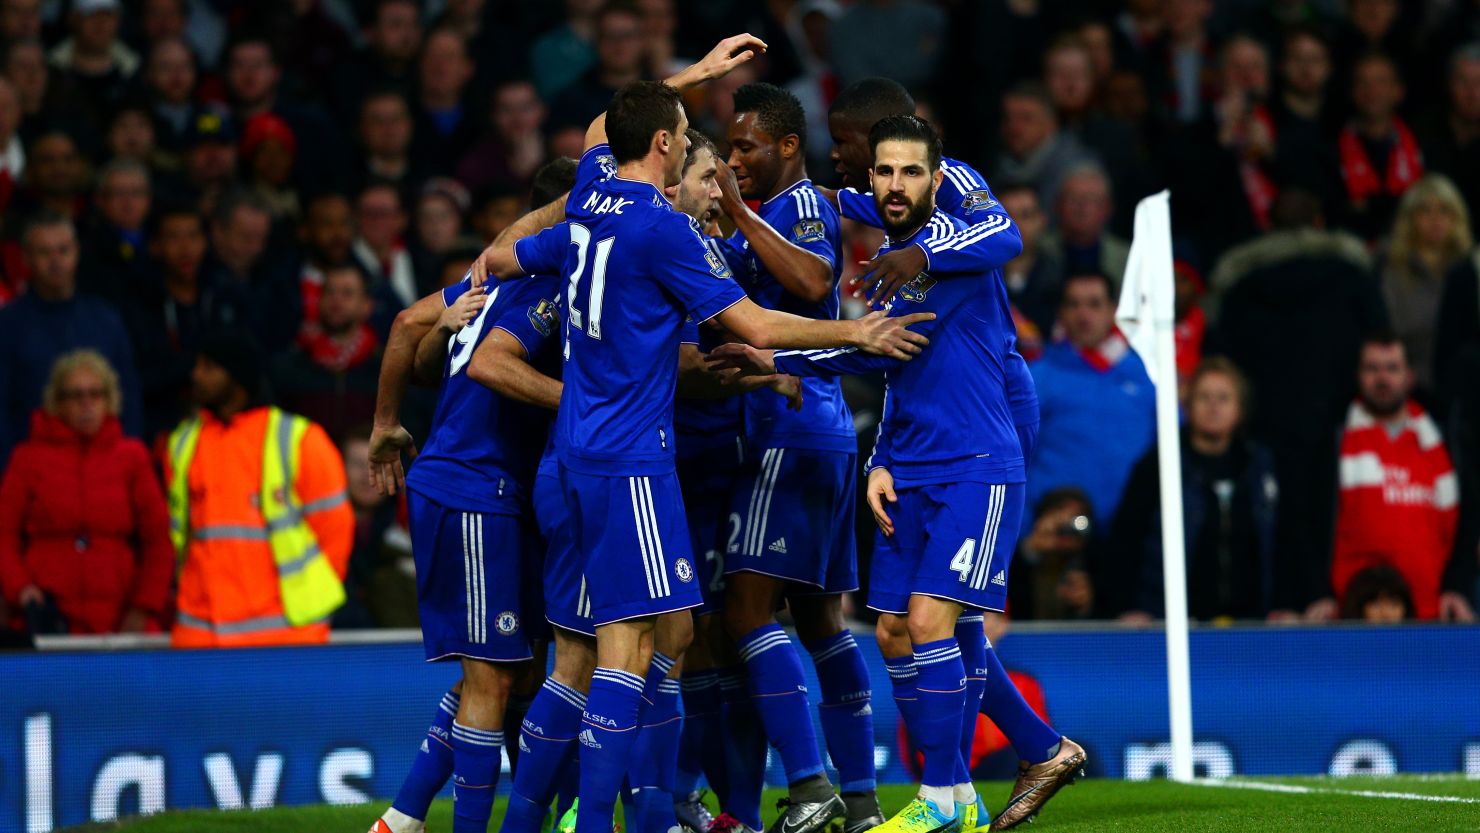 Diego Costa is mobbed by teammates after scoring the only goal of the game in the 1-0 win for Chelsea over Arsenal at the Emirates.